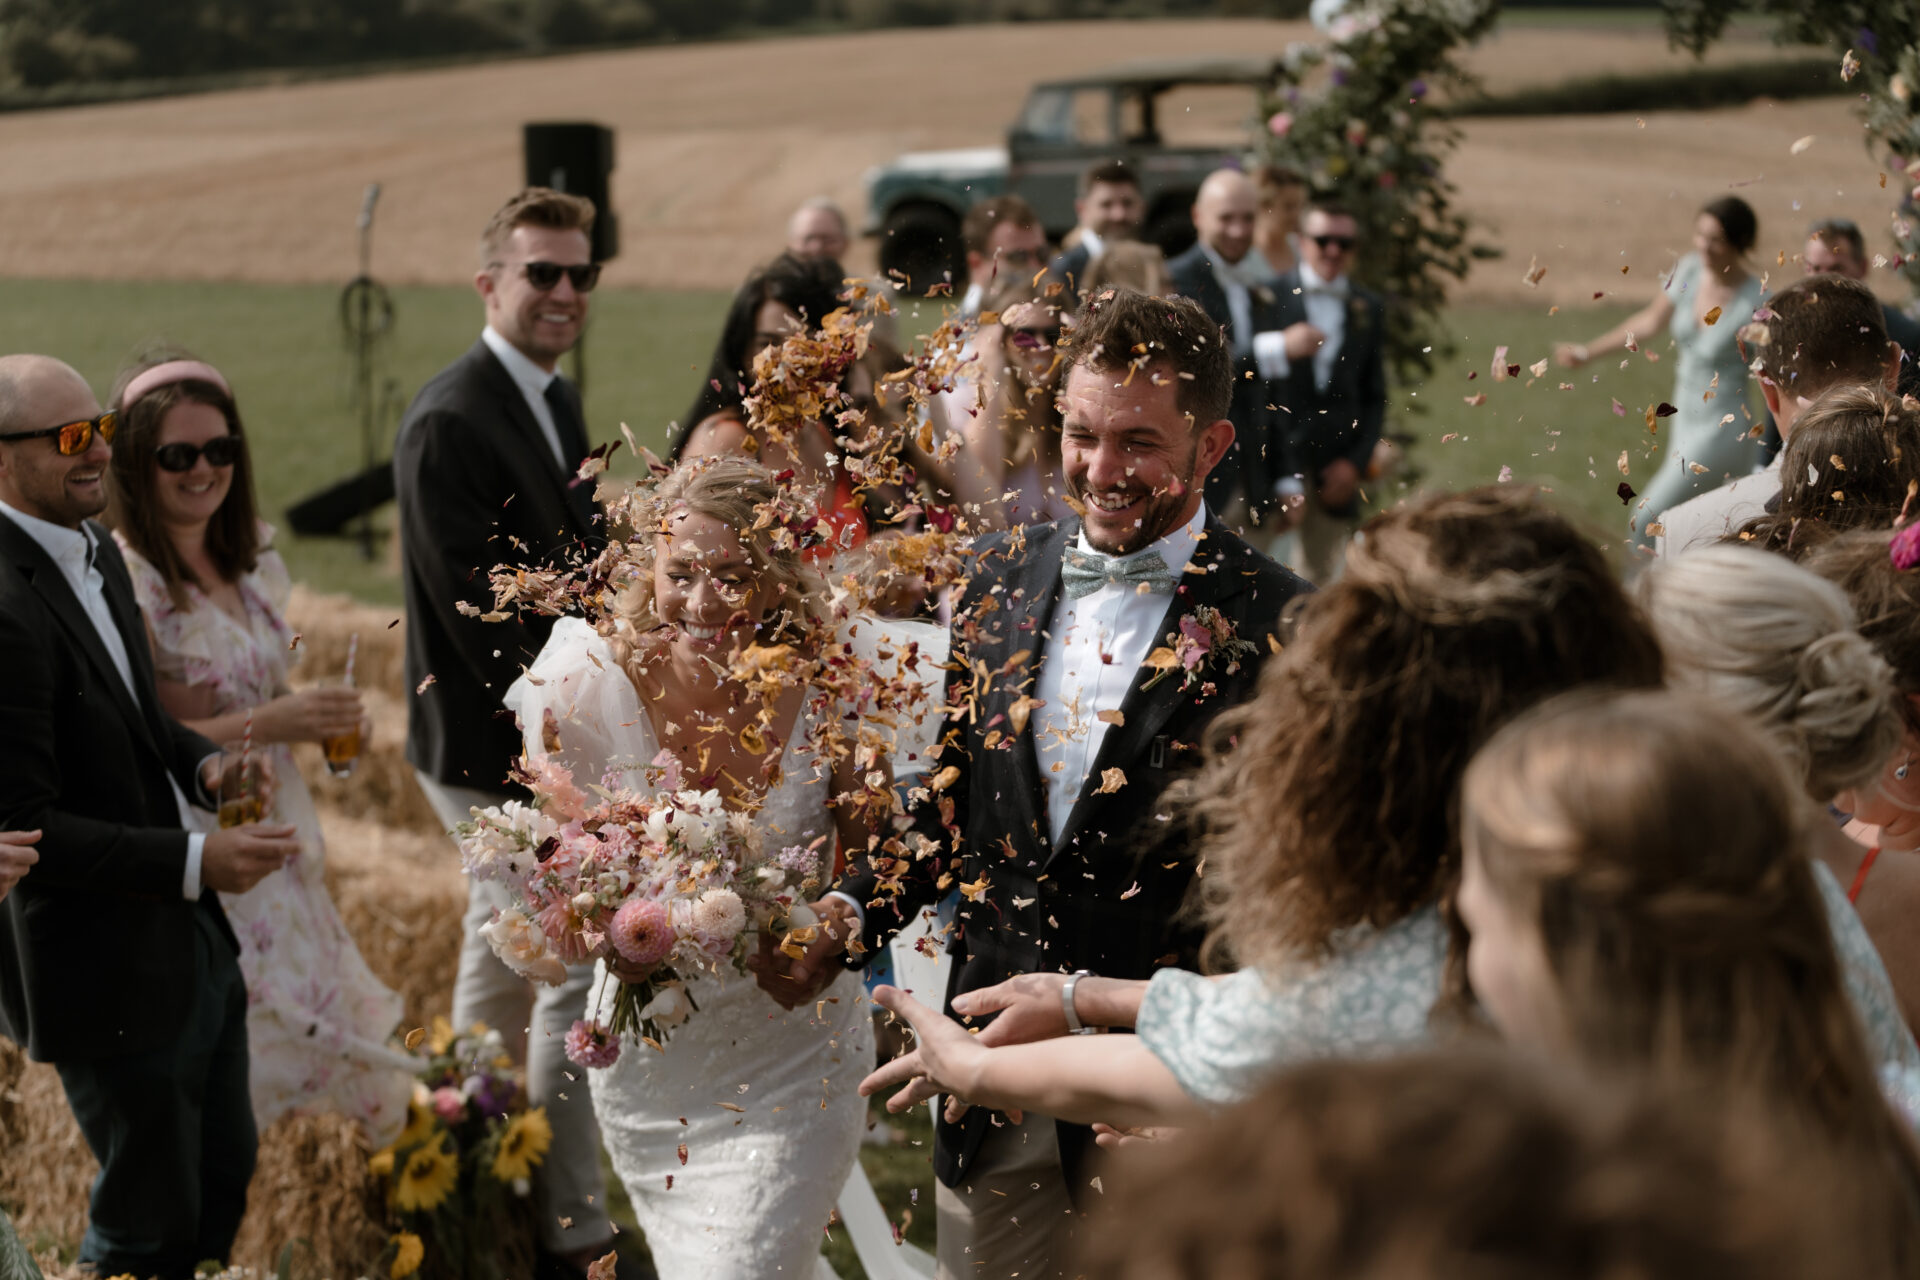 Recent wedding ceremony with confetti being thrown.